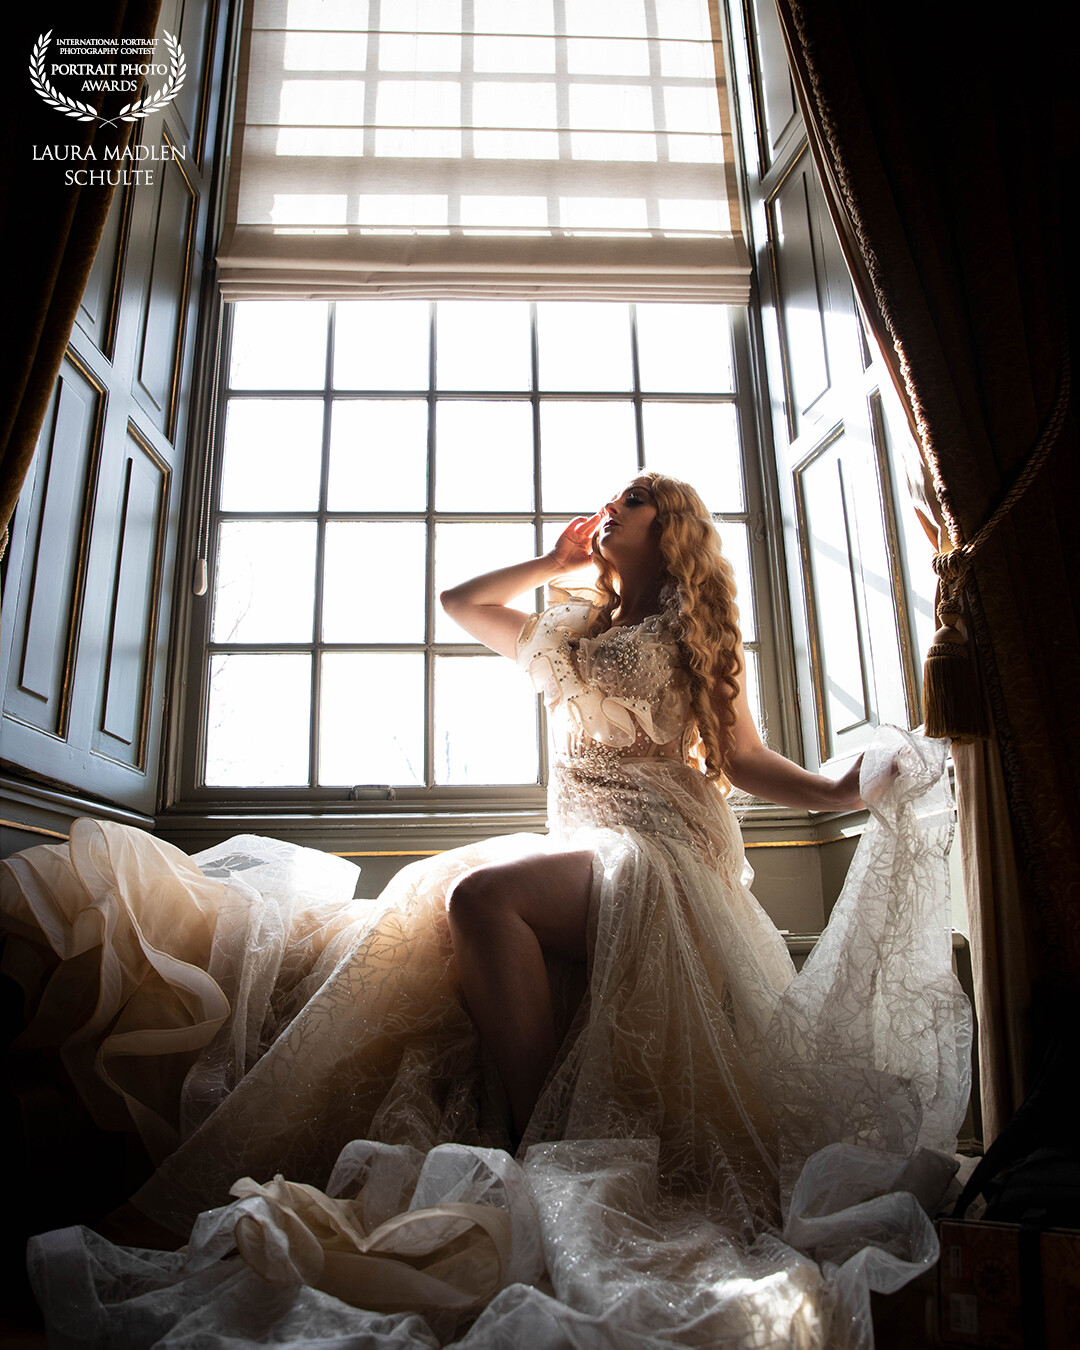 "A dance in an old castle. The last rays of sunlight illuminate the hall through the large windows. Tired feet from dancing let you take a break and enjoy the light."<br />
This picture was taken during a photo shoot in a castle in the Netherlands with available light & the Canon EOS 5D Mark IV + 24-70 2.8<br />
The model is Maya Lou and the outfit is made by Oksana Schleekeil Design.